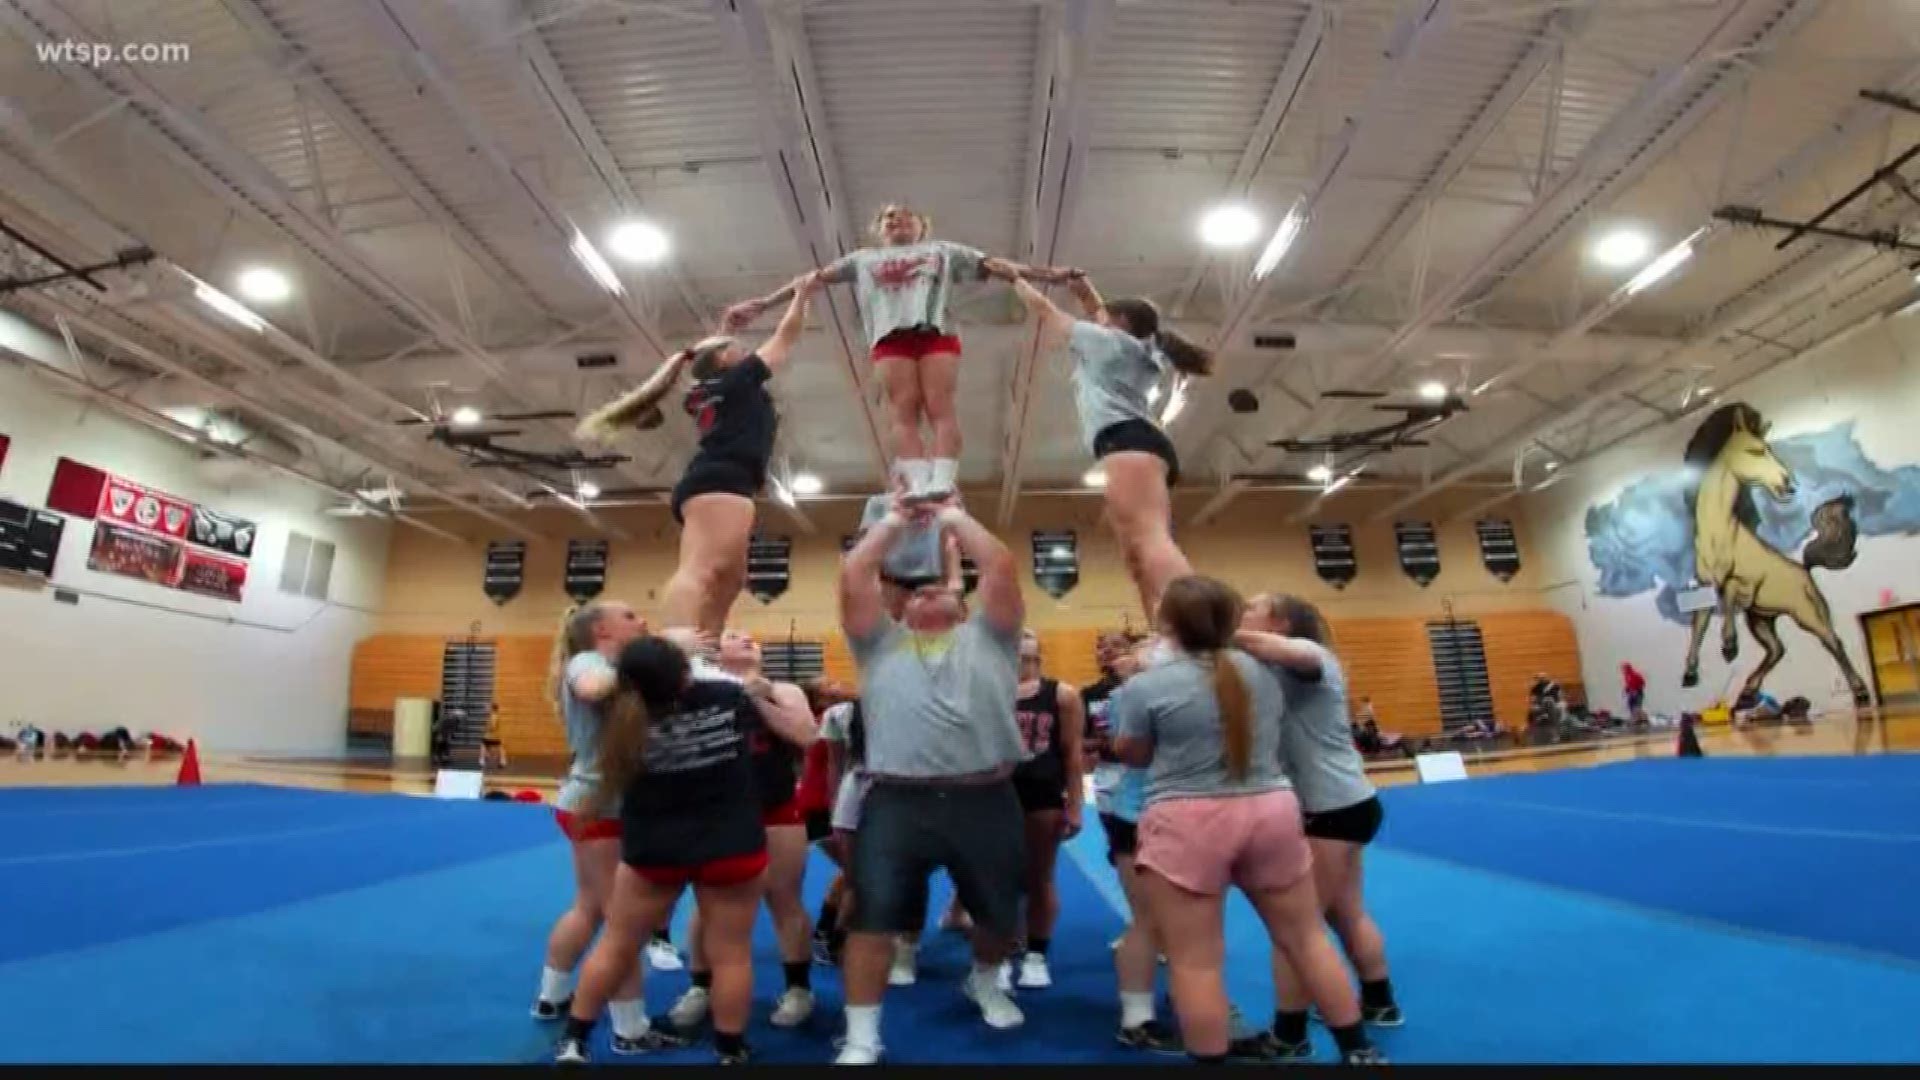 Strawberry Crest High School won the national title and they're the first cheer team in Hillsborough County to do so.